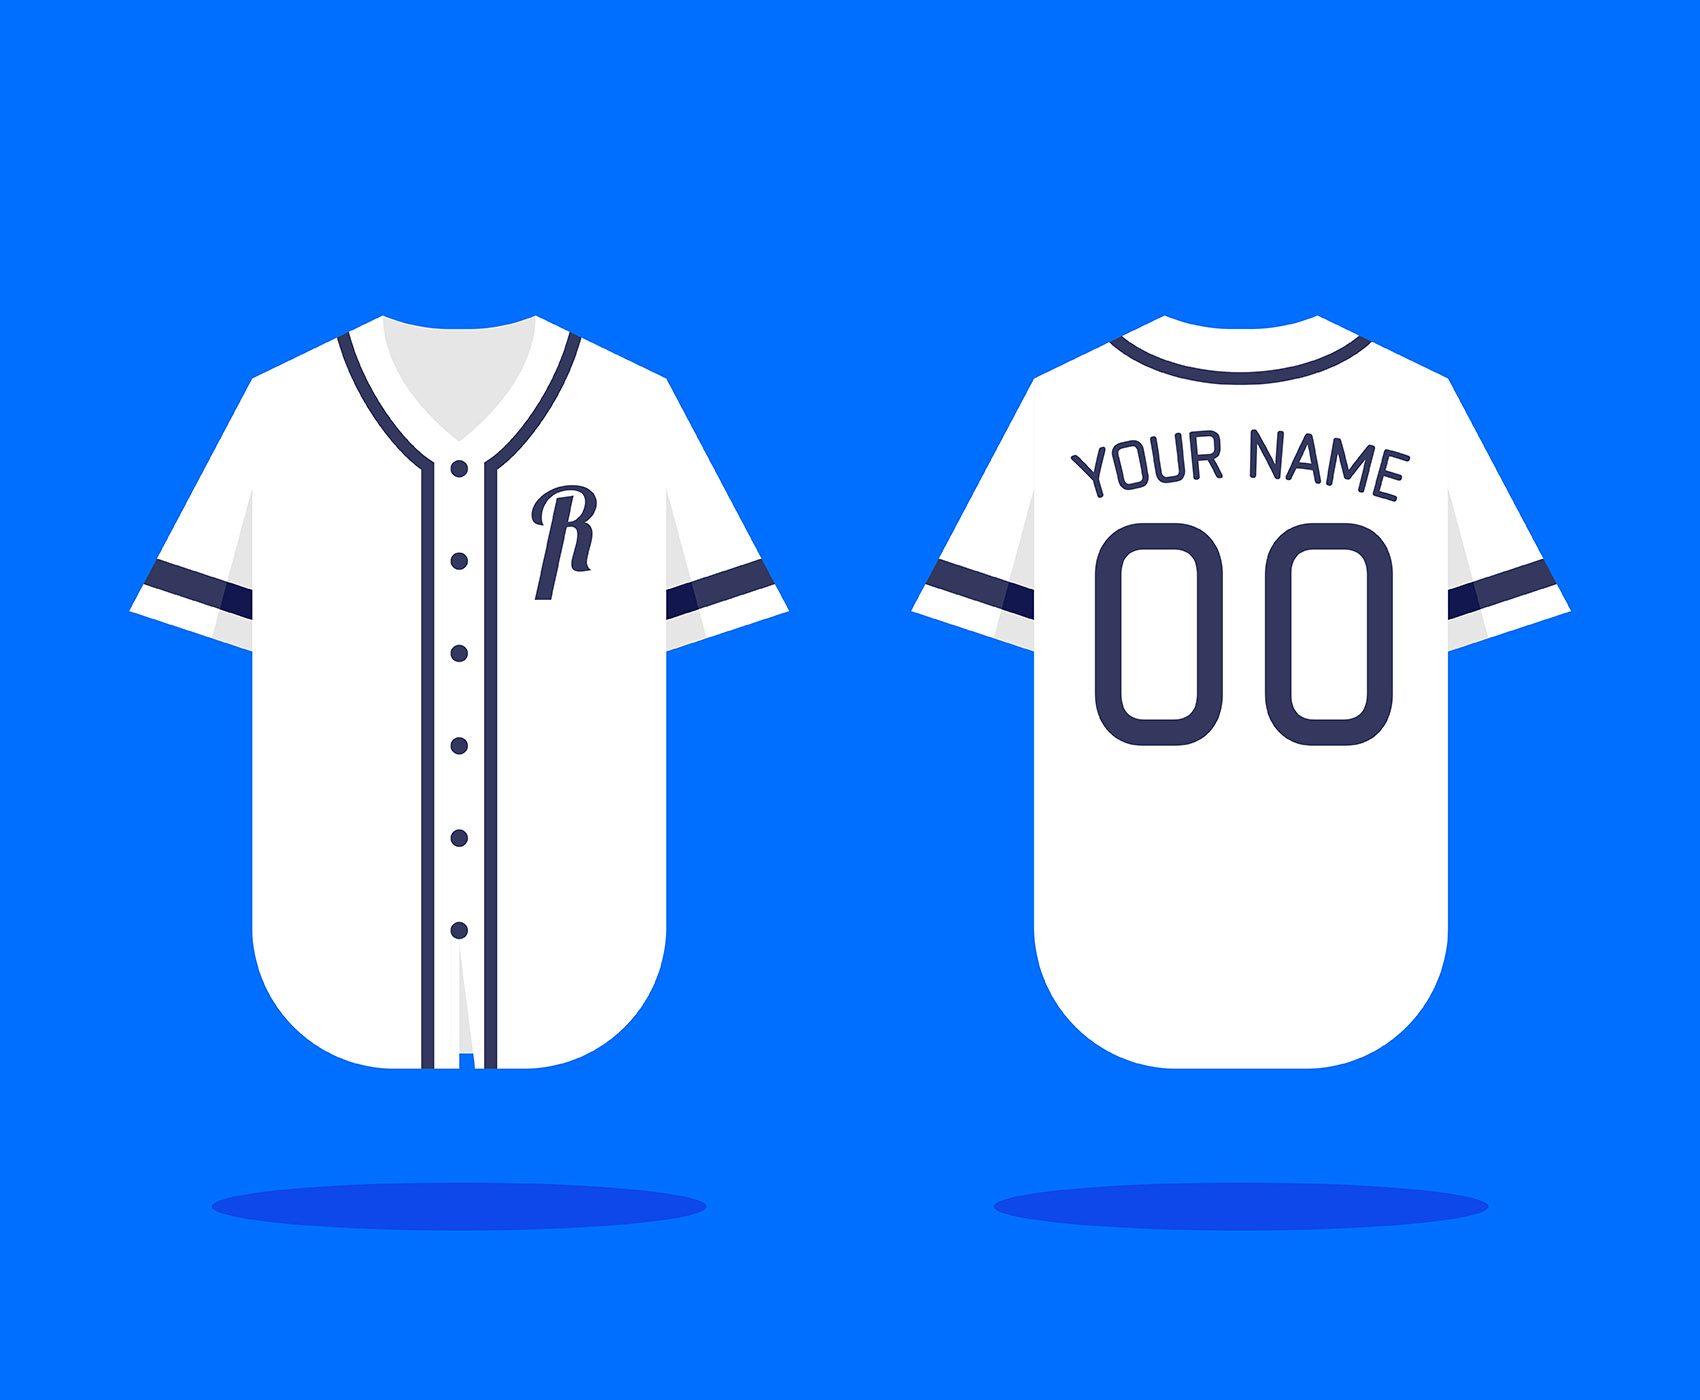 Download Baseball Jersey Mockup Vector Art Icons And Graphics For Free Download Free Mockups